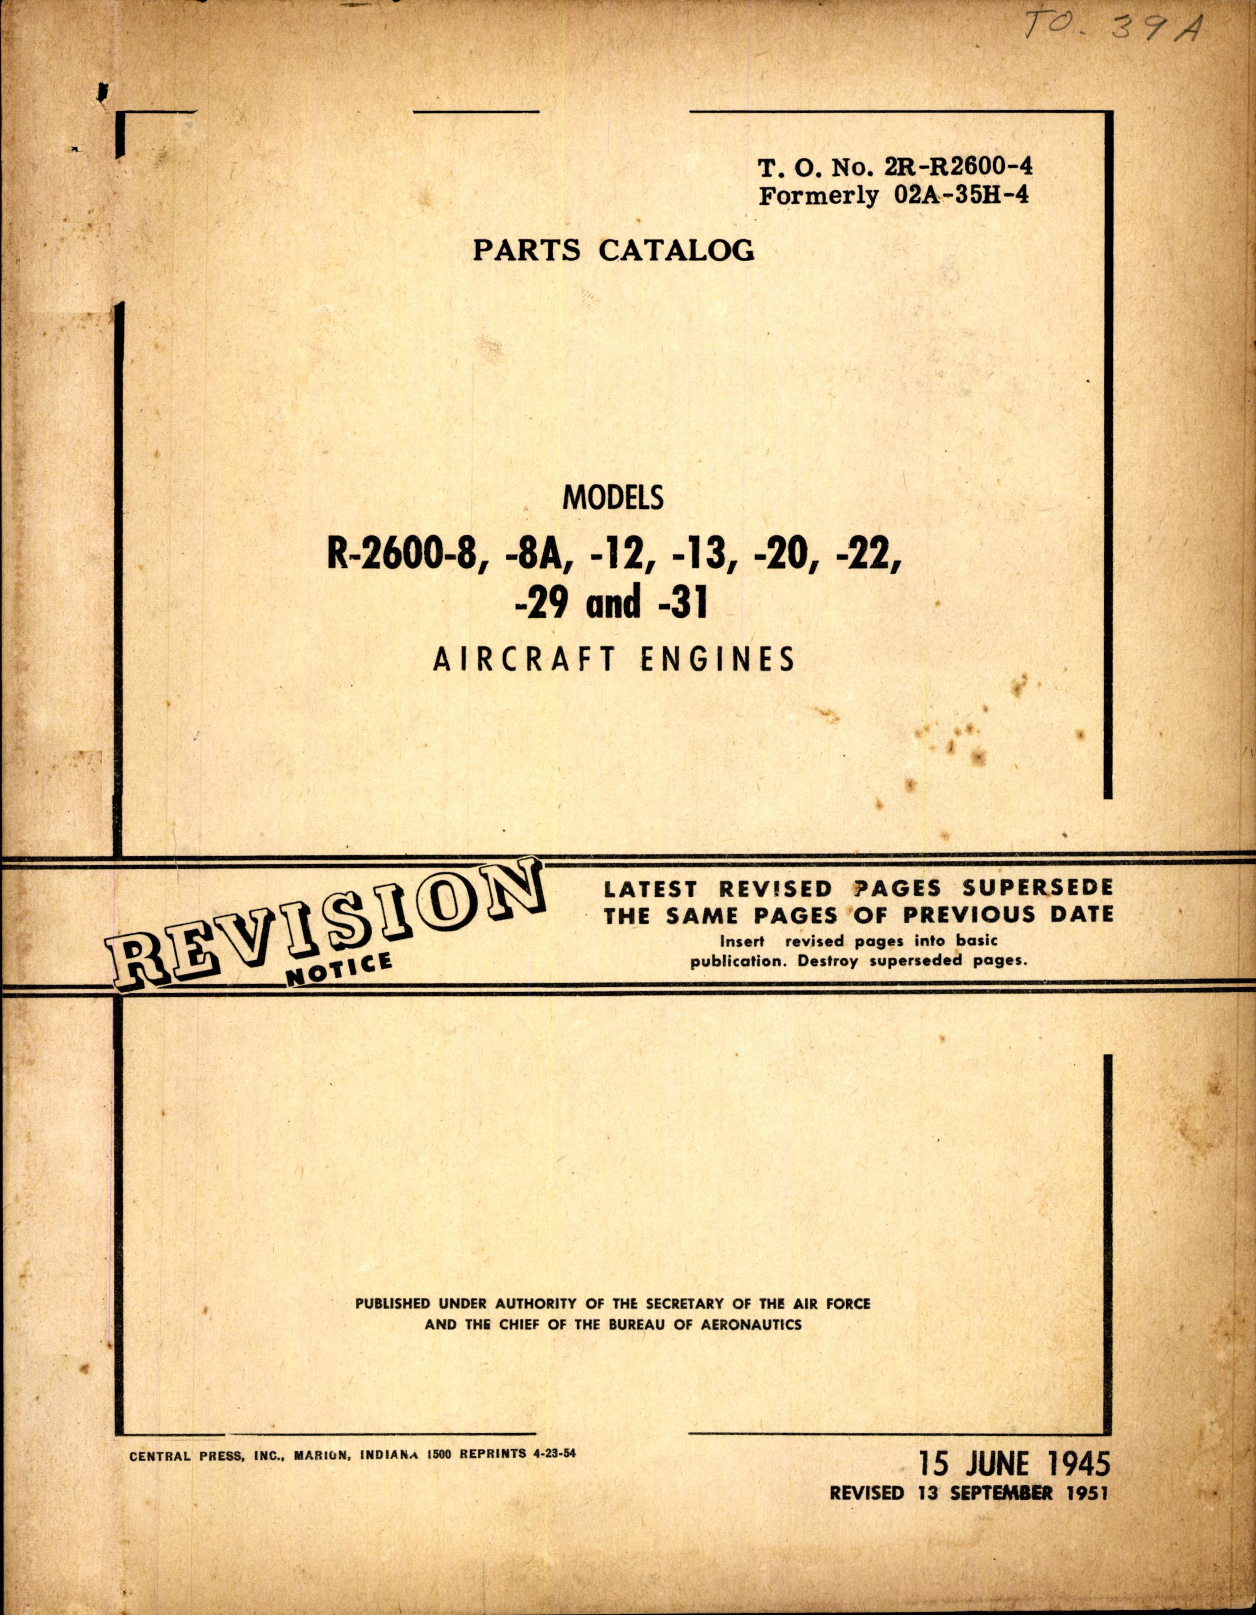 Sample page 1 from AirCorps Library document: Parts Catalog for R-2600 Engine Series